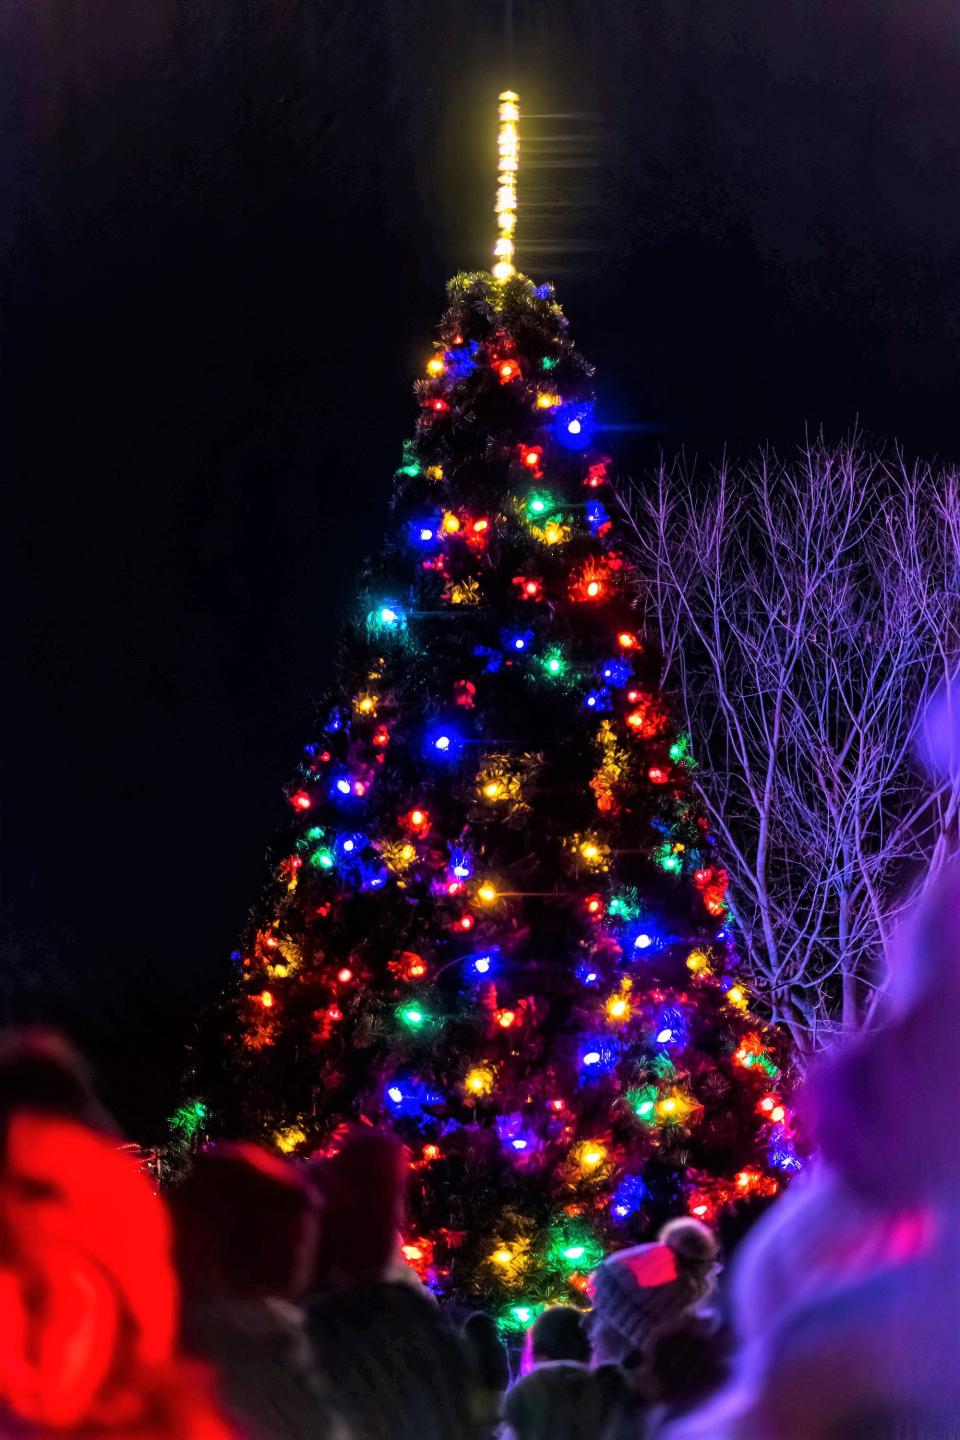 The lighting of the Sister Bay Christmas tree in Waterfront Park over the Thanksgiving weekend is among the special events in the village's annual "Capture the Spirit" holiday festival, this year taking place Nov. 24 and 25.